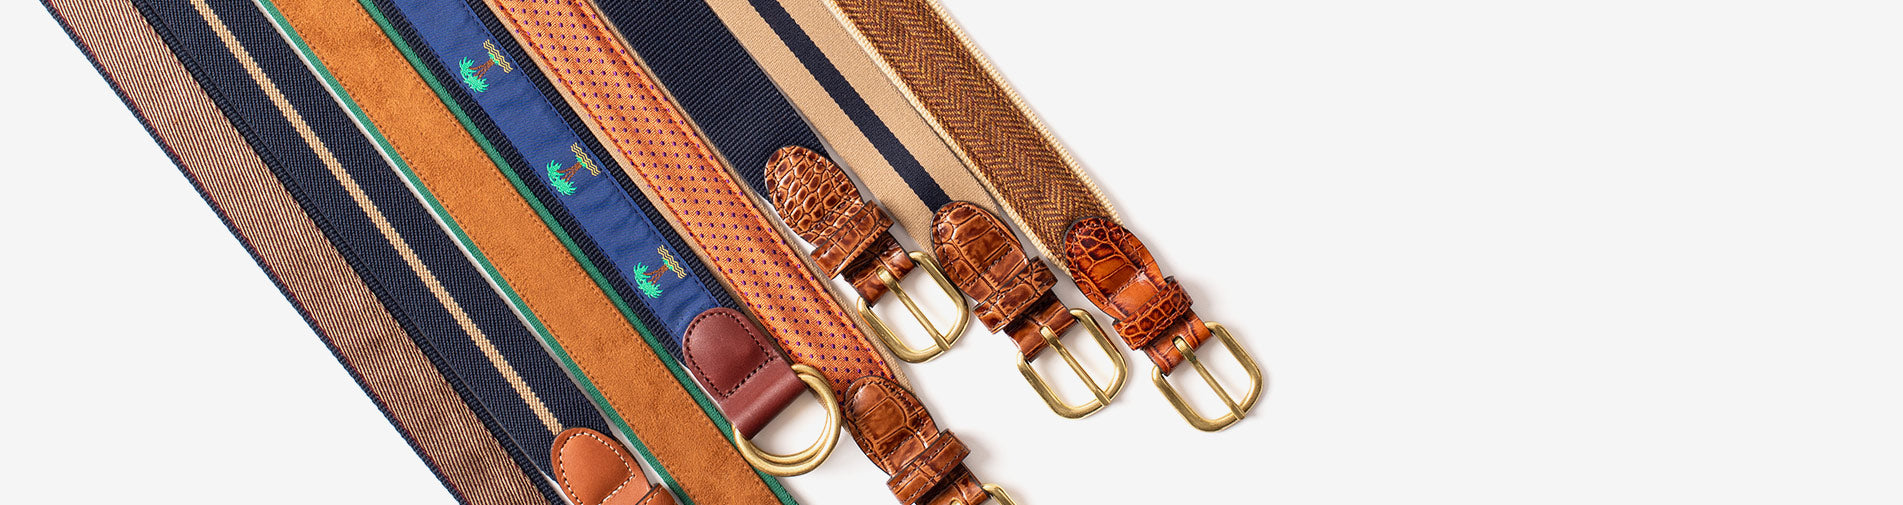 Handcrafted in the USA: Classic Men's Belts by Barrons-Hunter